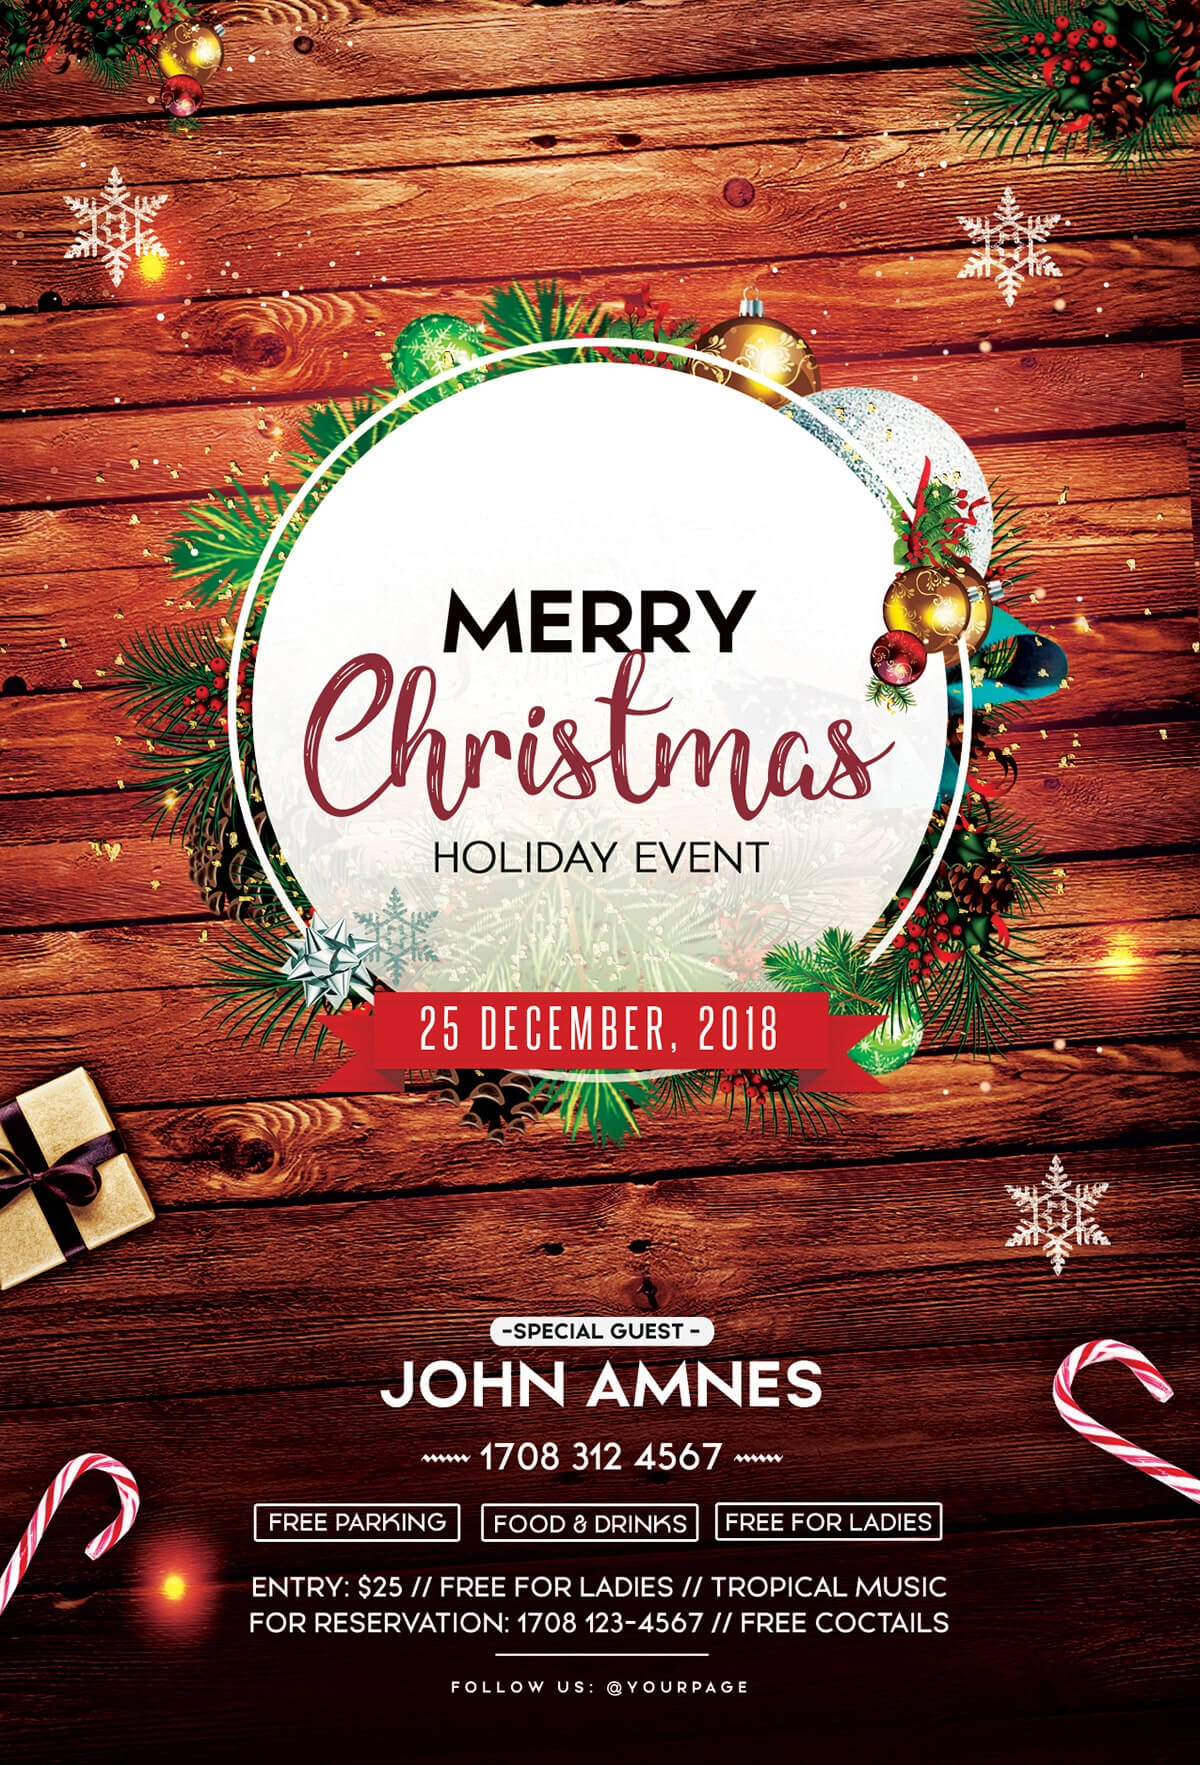 Merry Christmas 2018 – Free Psd Flyer Template – Free Psd Inside Christmas Brochure Templates Free